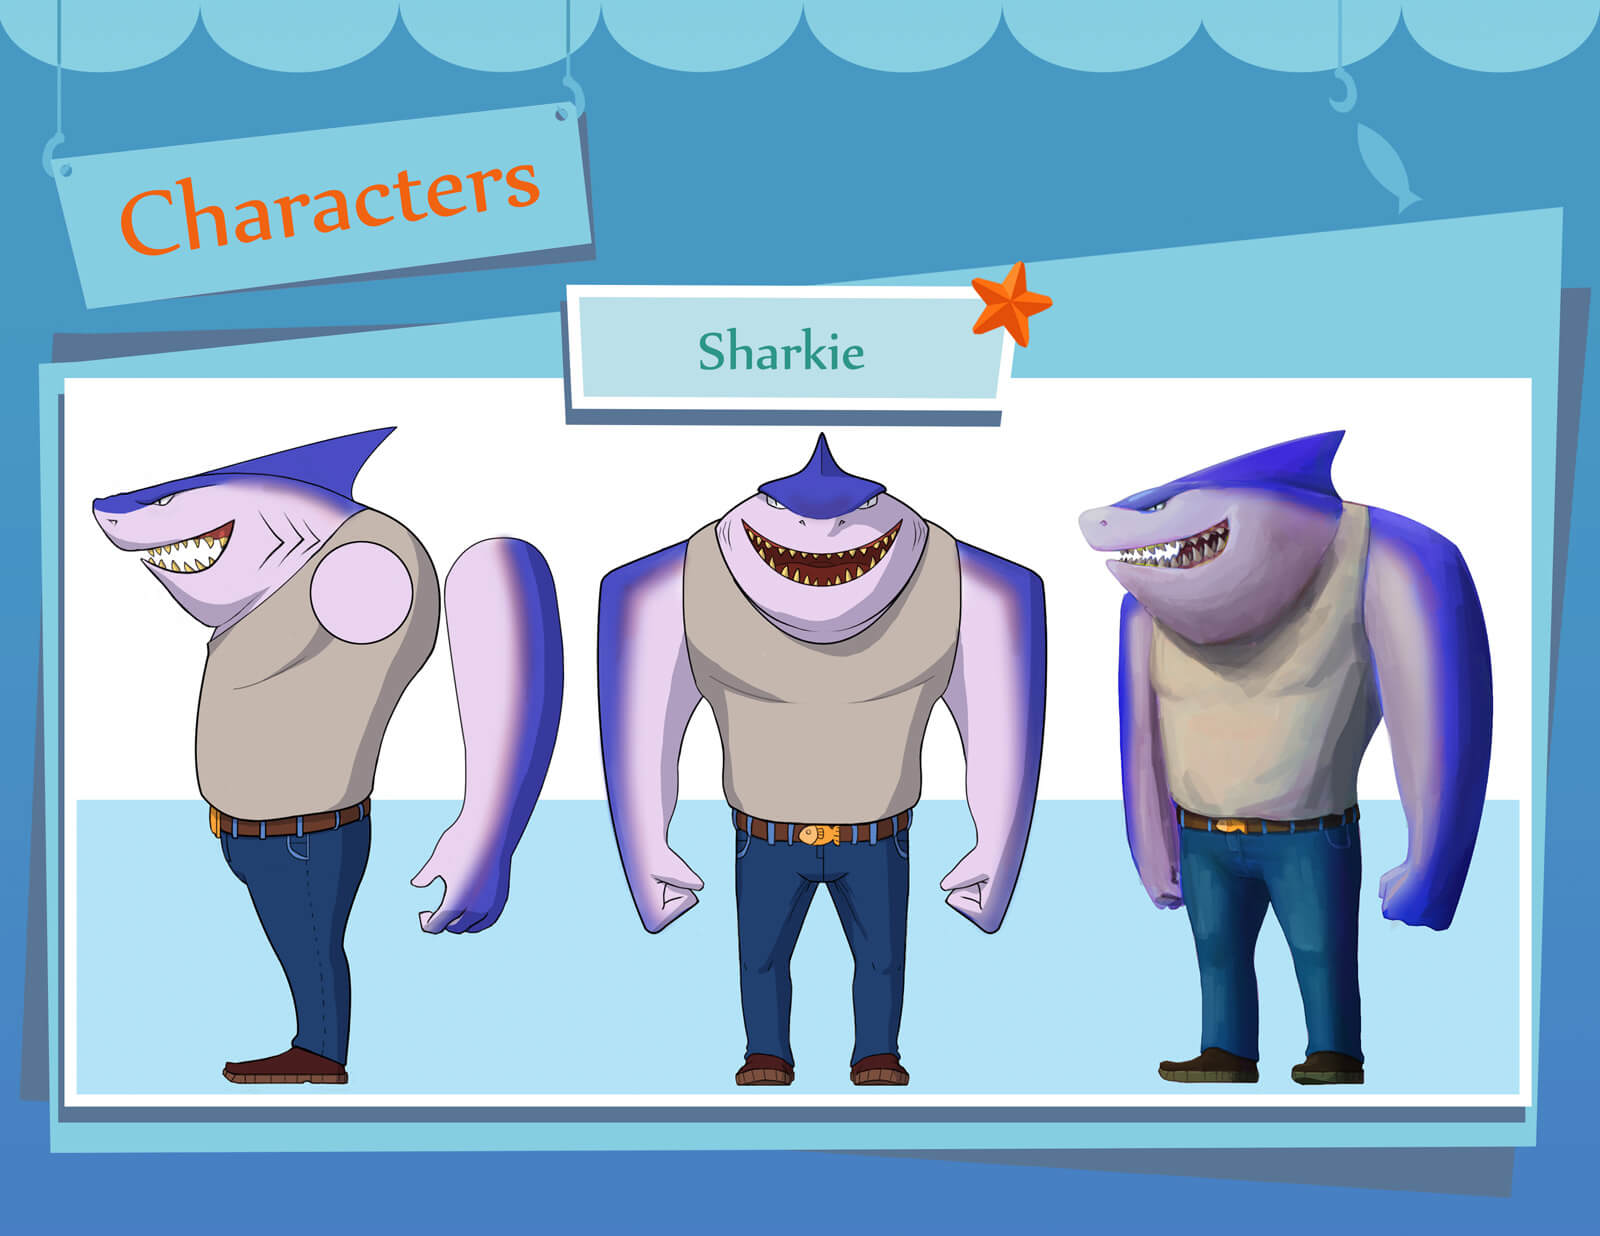 Silhouettes of three characters, labeled Jelly, Lil' Fish, and Sharkie, depicting relative sizes